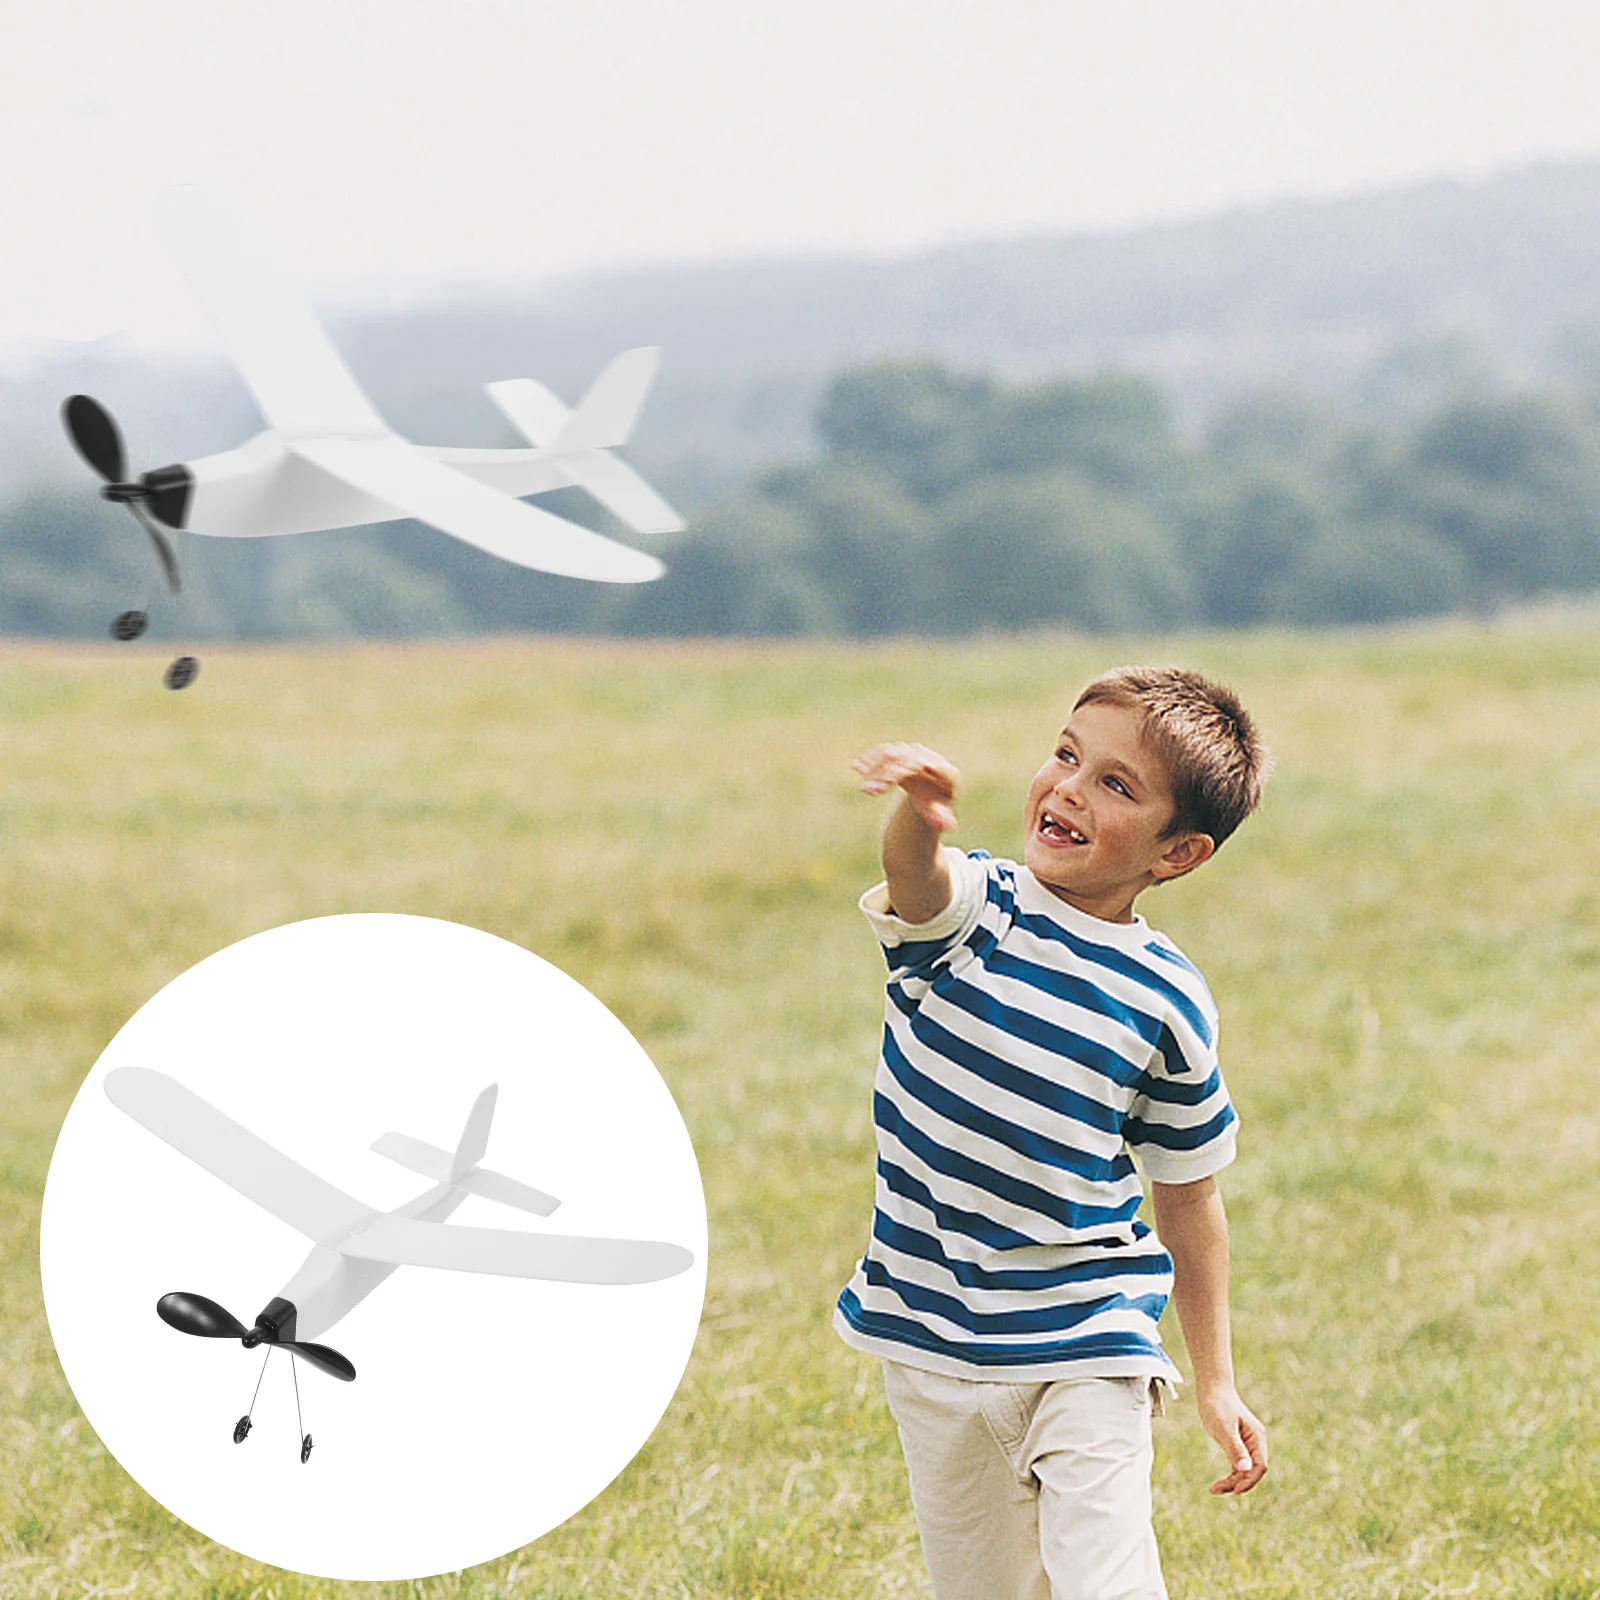 

Rubber Band Airplane Funny Rubber Band Powered Plane Models Kids Plaything Random Color